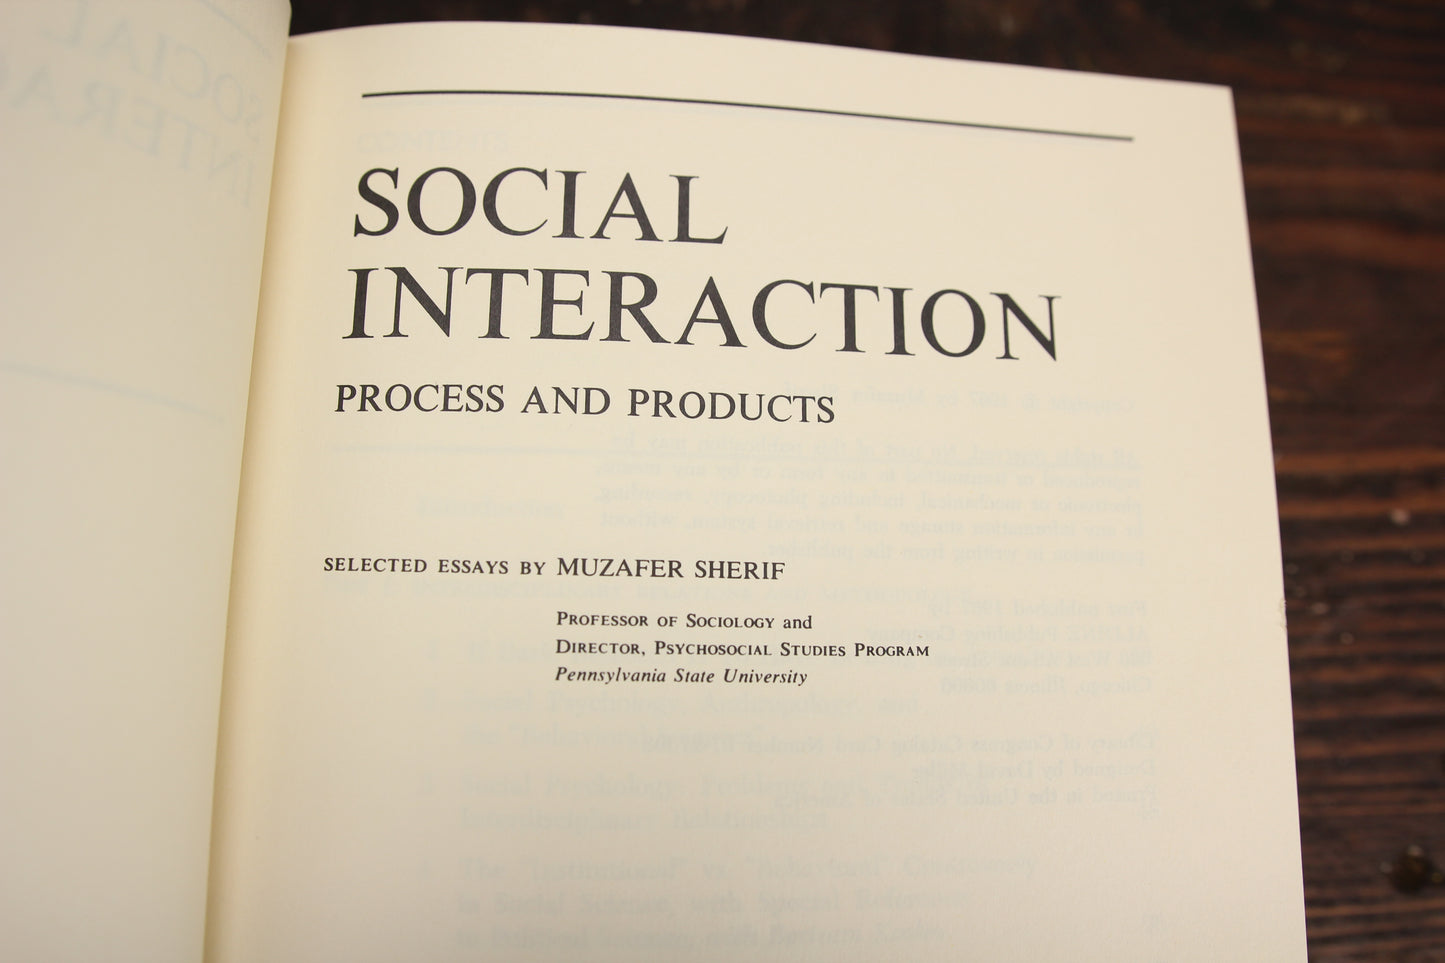 Social Interaction: Process and Products by Muzafar Sherif, Copyright 1967